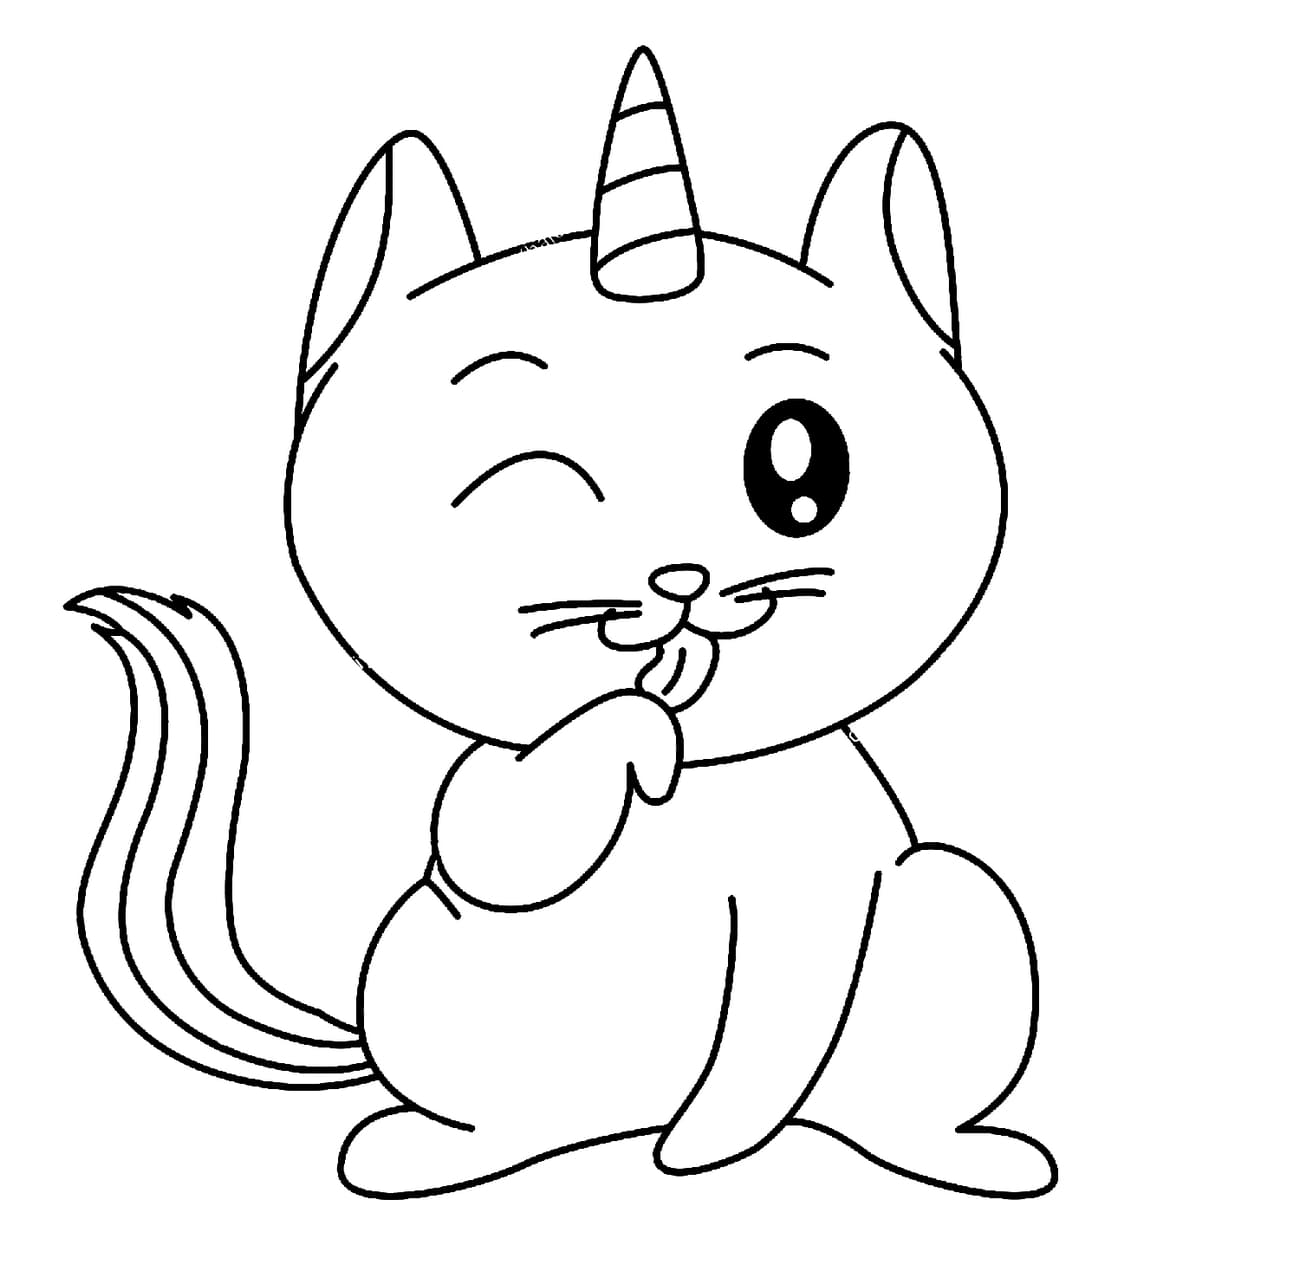 Coloring page Unicorn Cat licking his lips